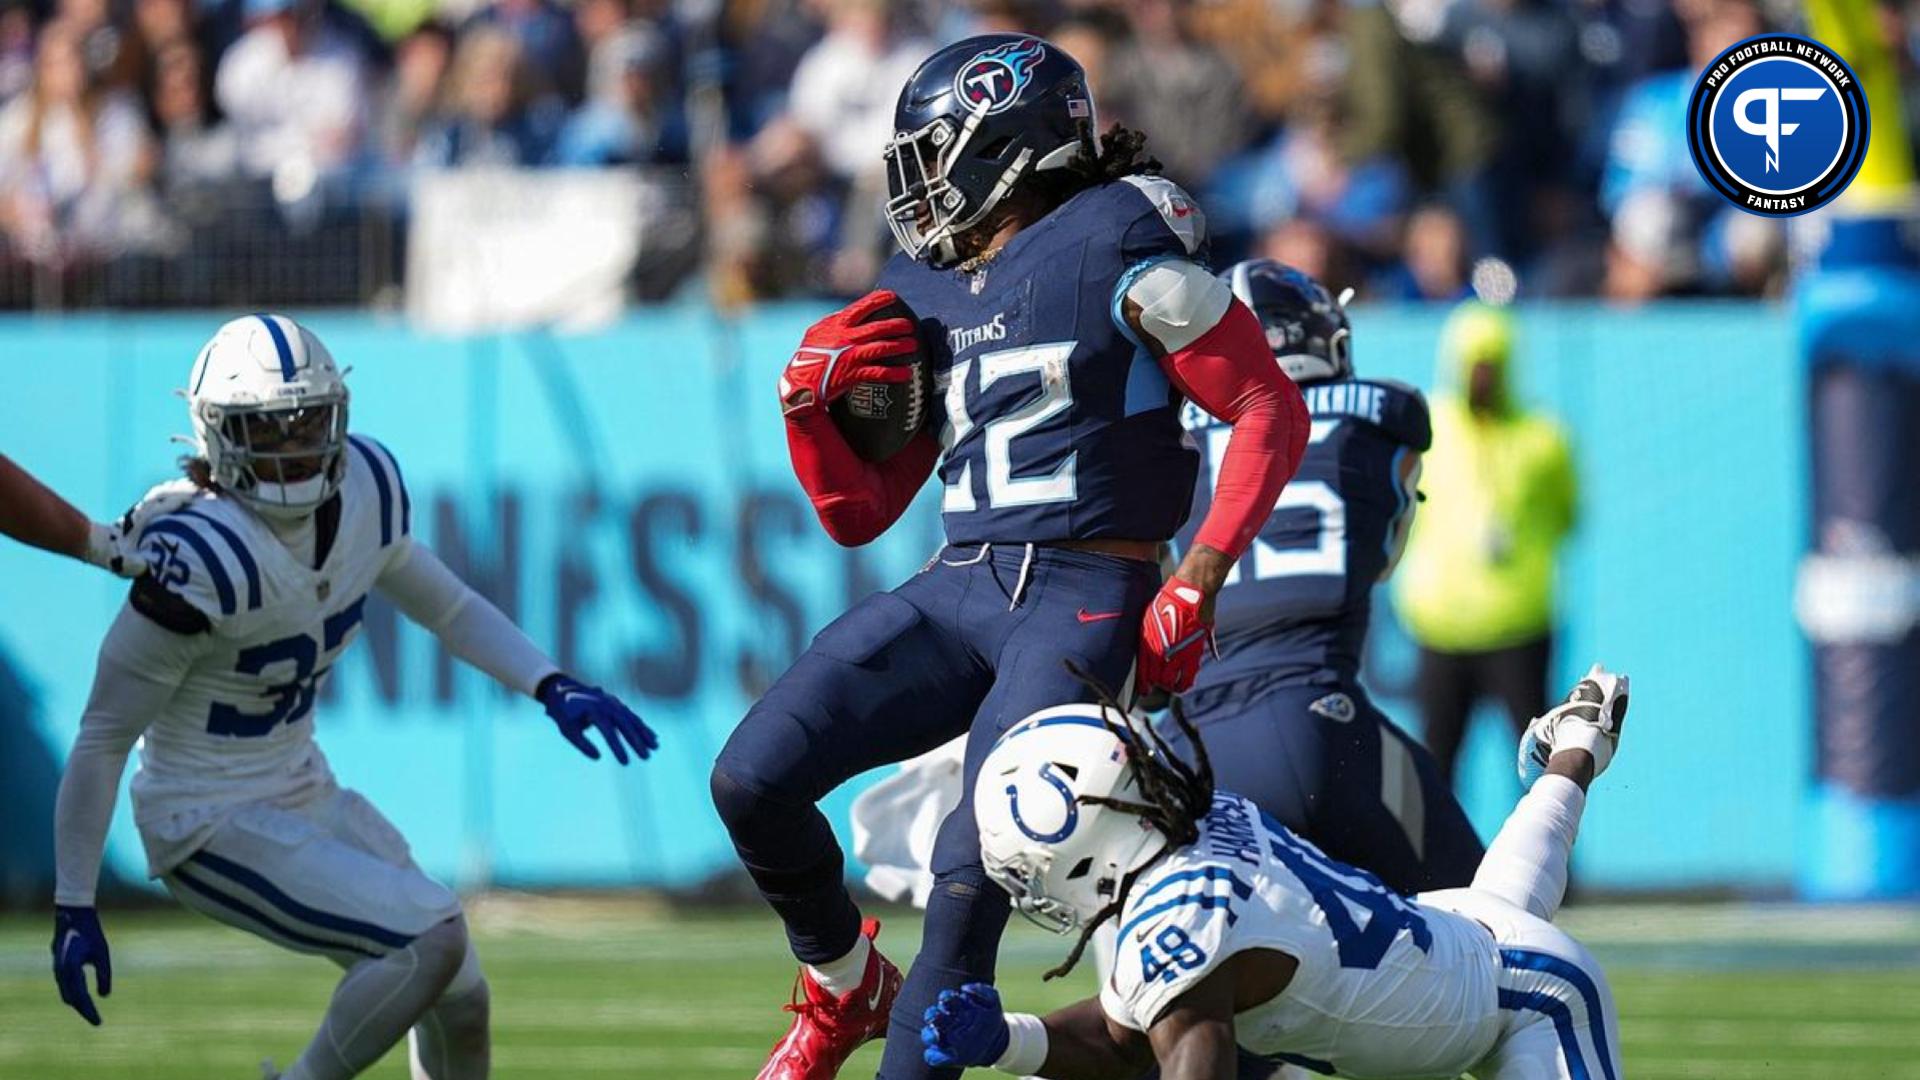 Tennessee Titans running back Derrick Henry (22) slips away from Indianapolis Colts safety Ronnie Harrison Jr. (48) for a Titans first down.